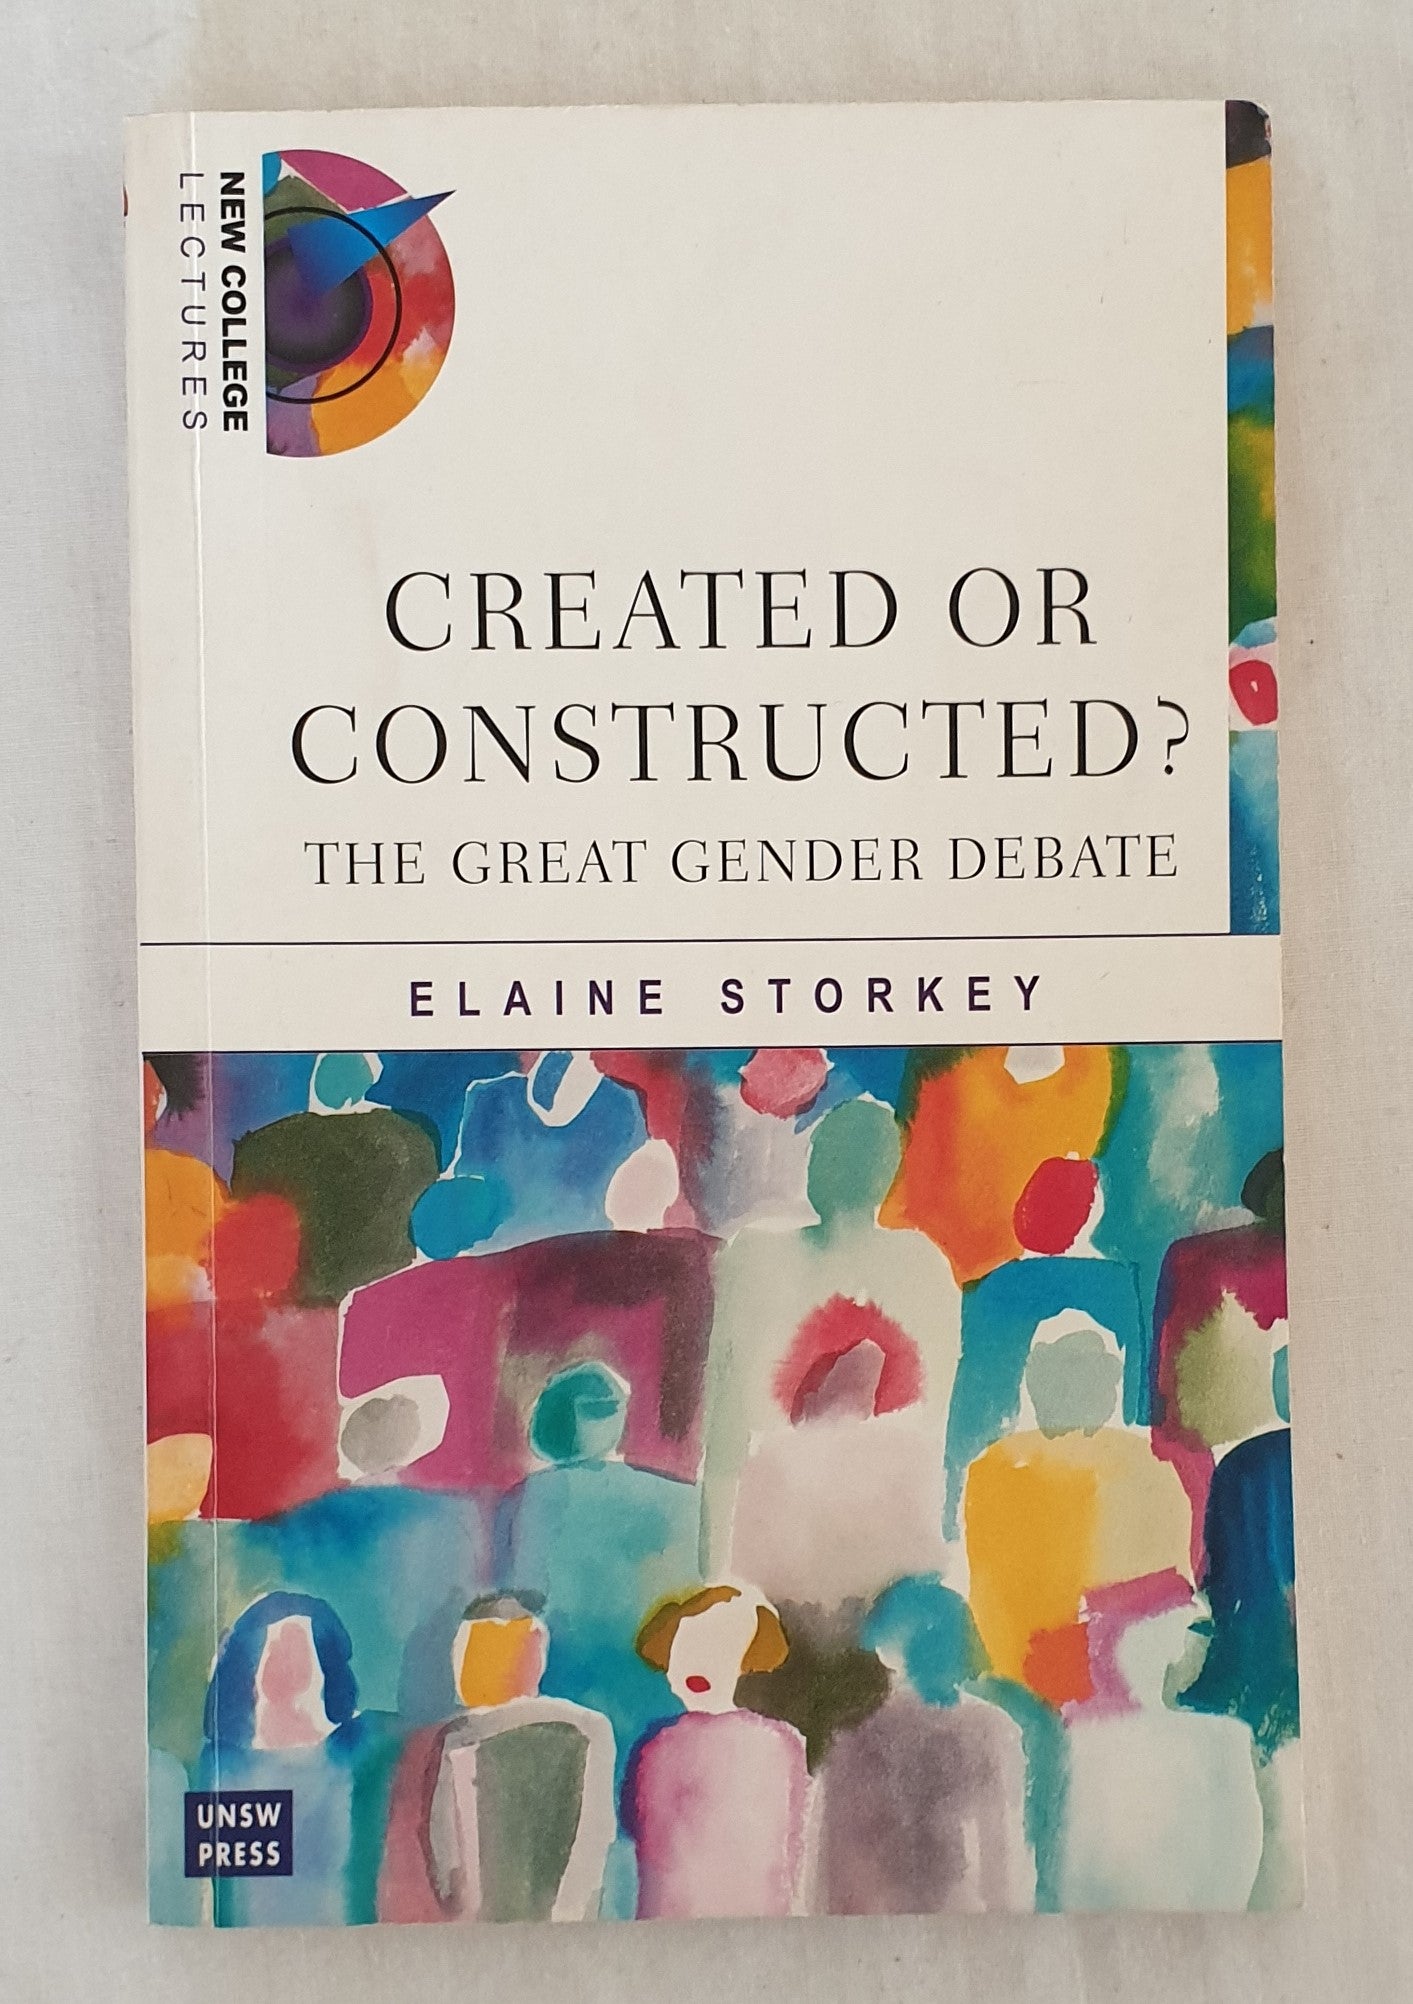 Created or Constructed? by Elaine Storkey